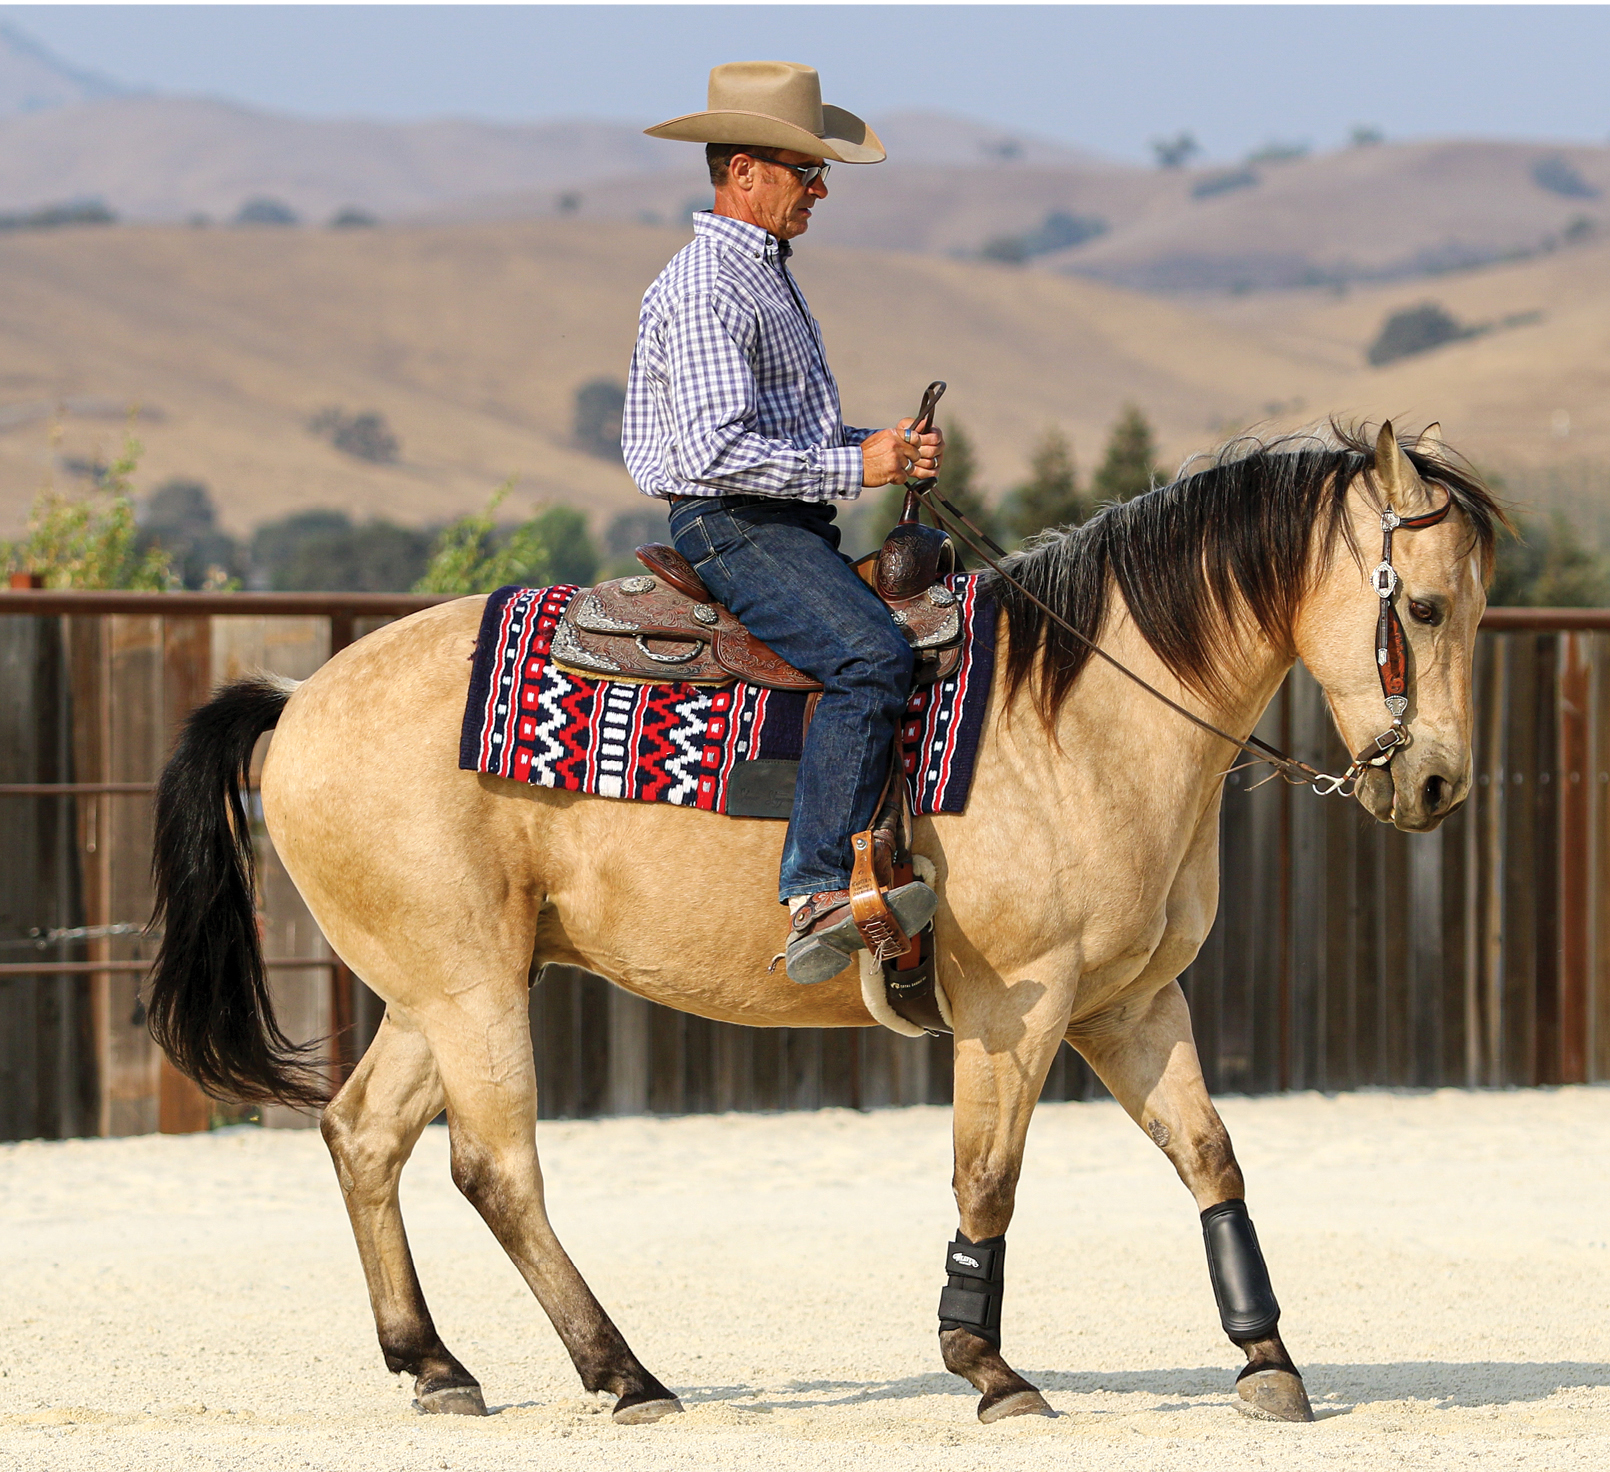 Choosing the right spurs for riding your horse – Our Guide, Naylors Blog